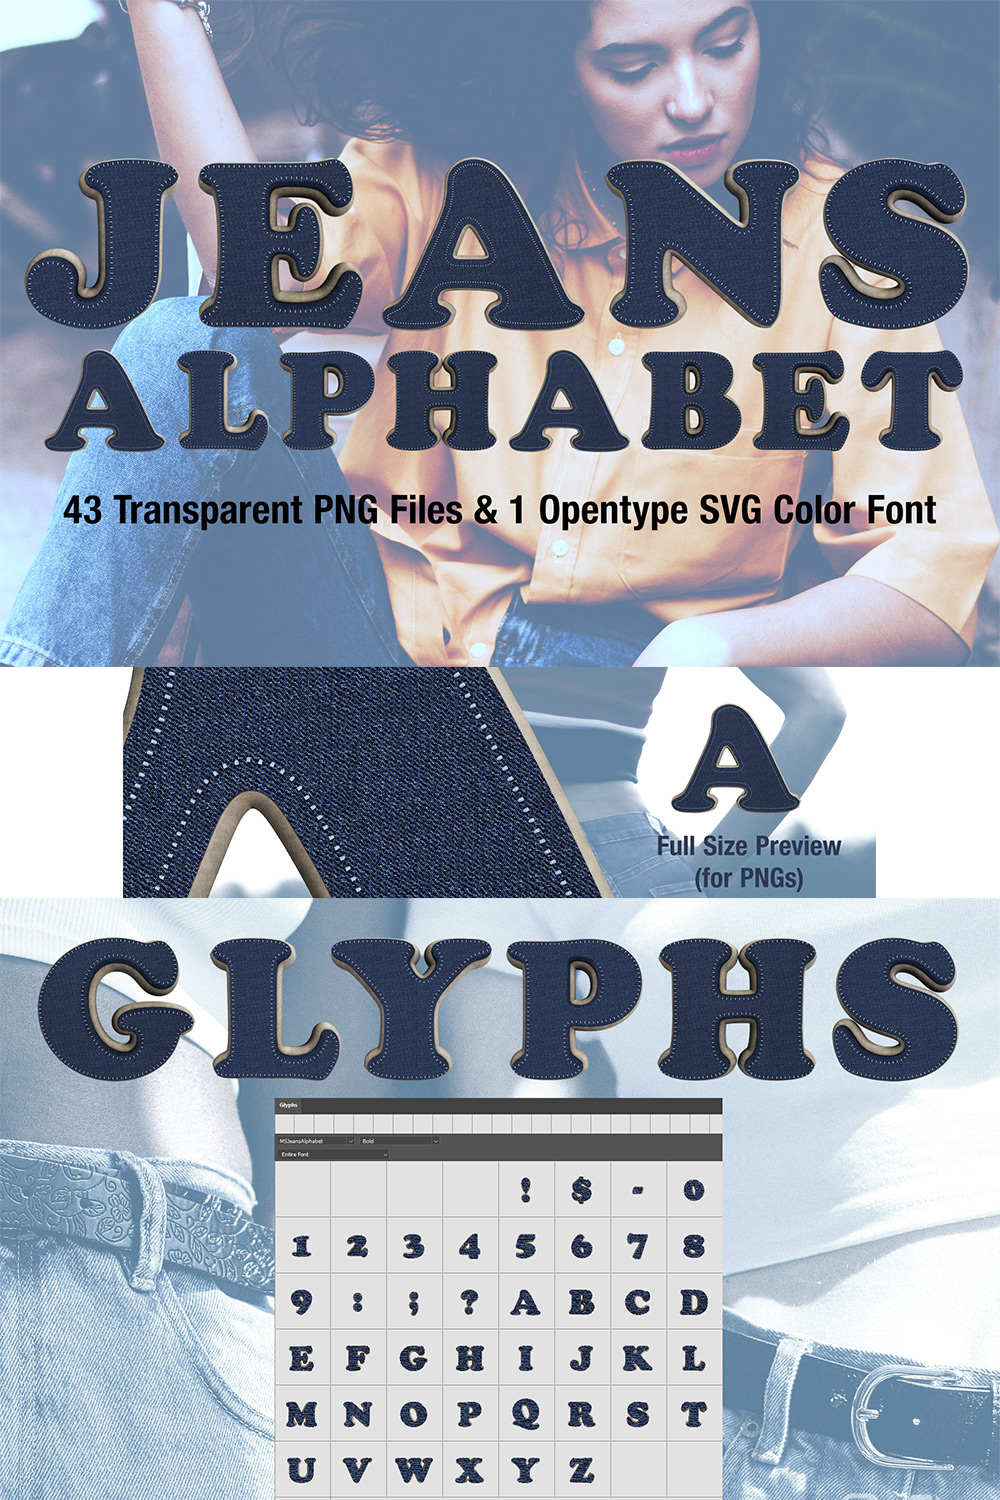 Ms Jeans Opentype SVG Font and PNGs - pinterest image preview.